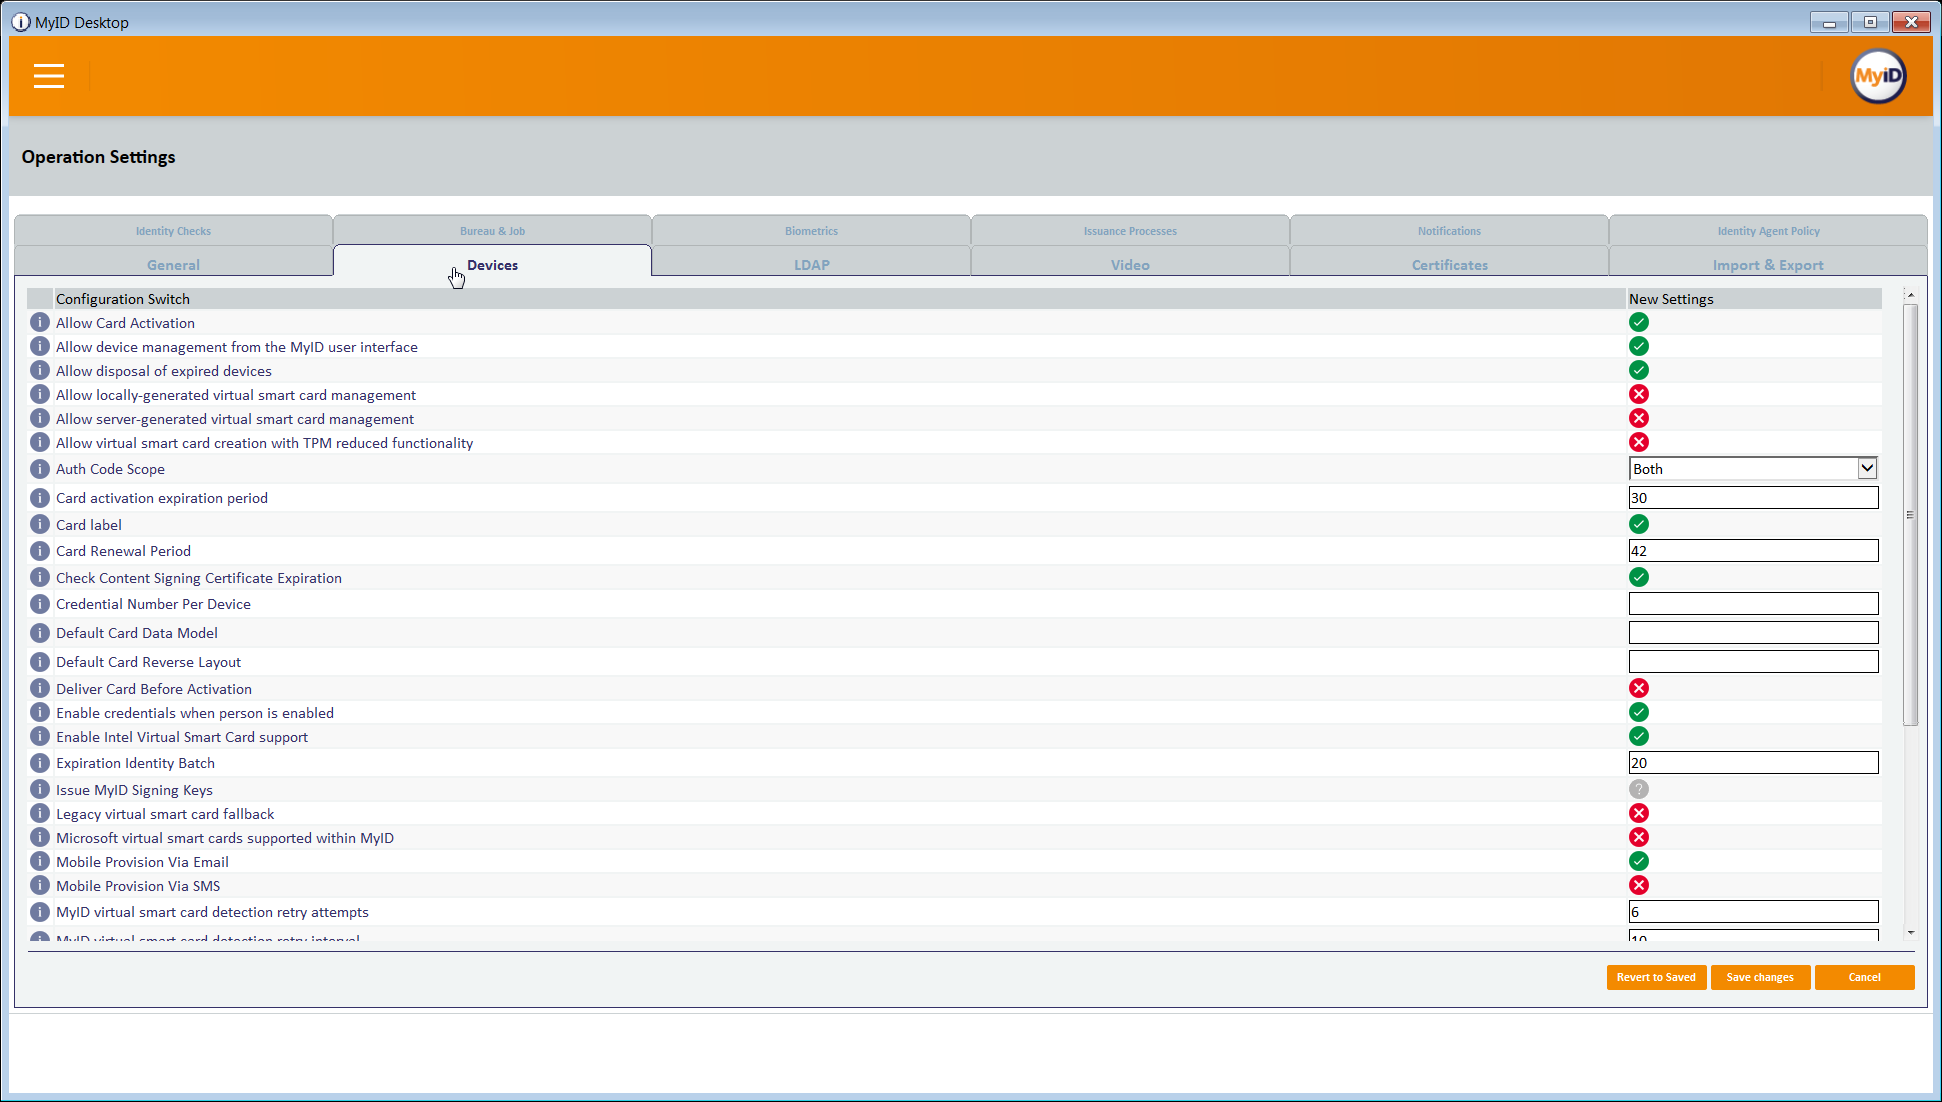 A screenshot of the Operation Settings/Devices tab in the MyID Desktop application.